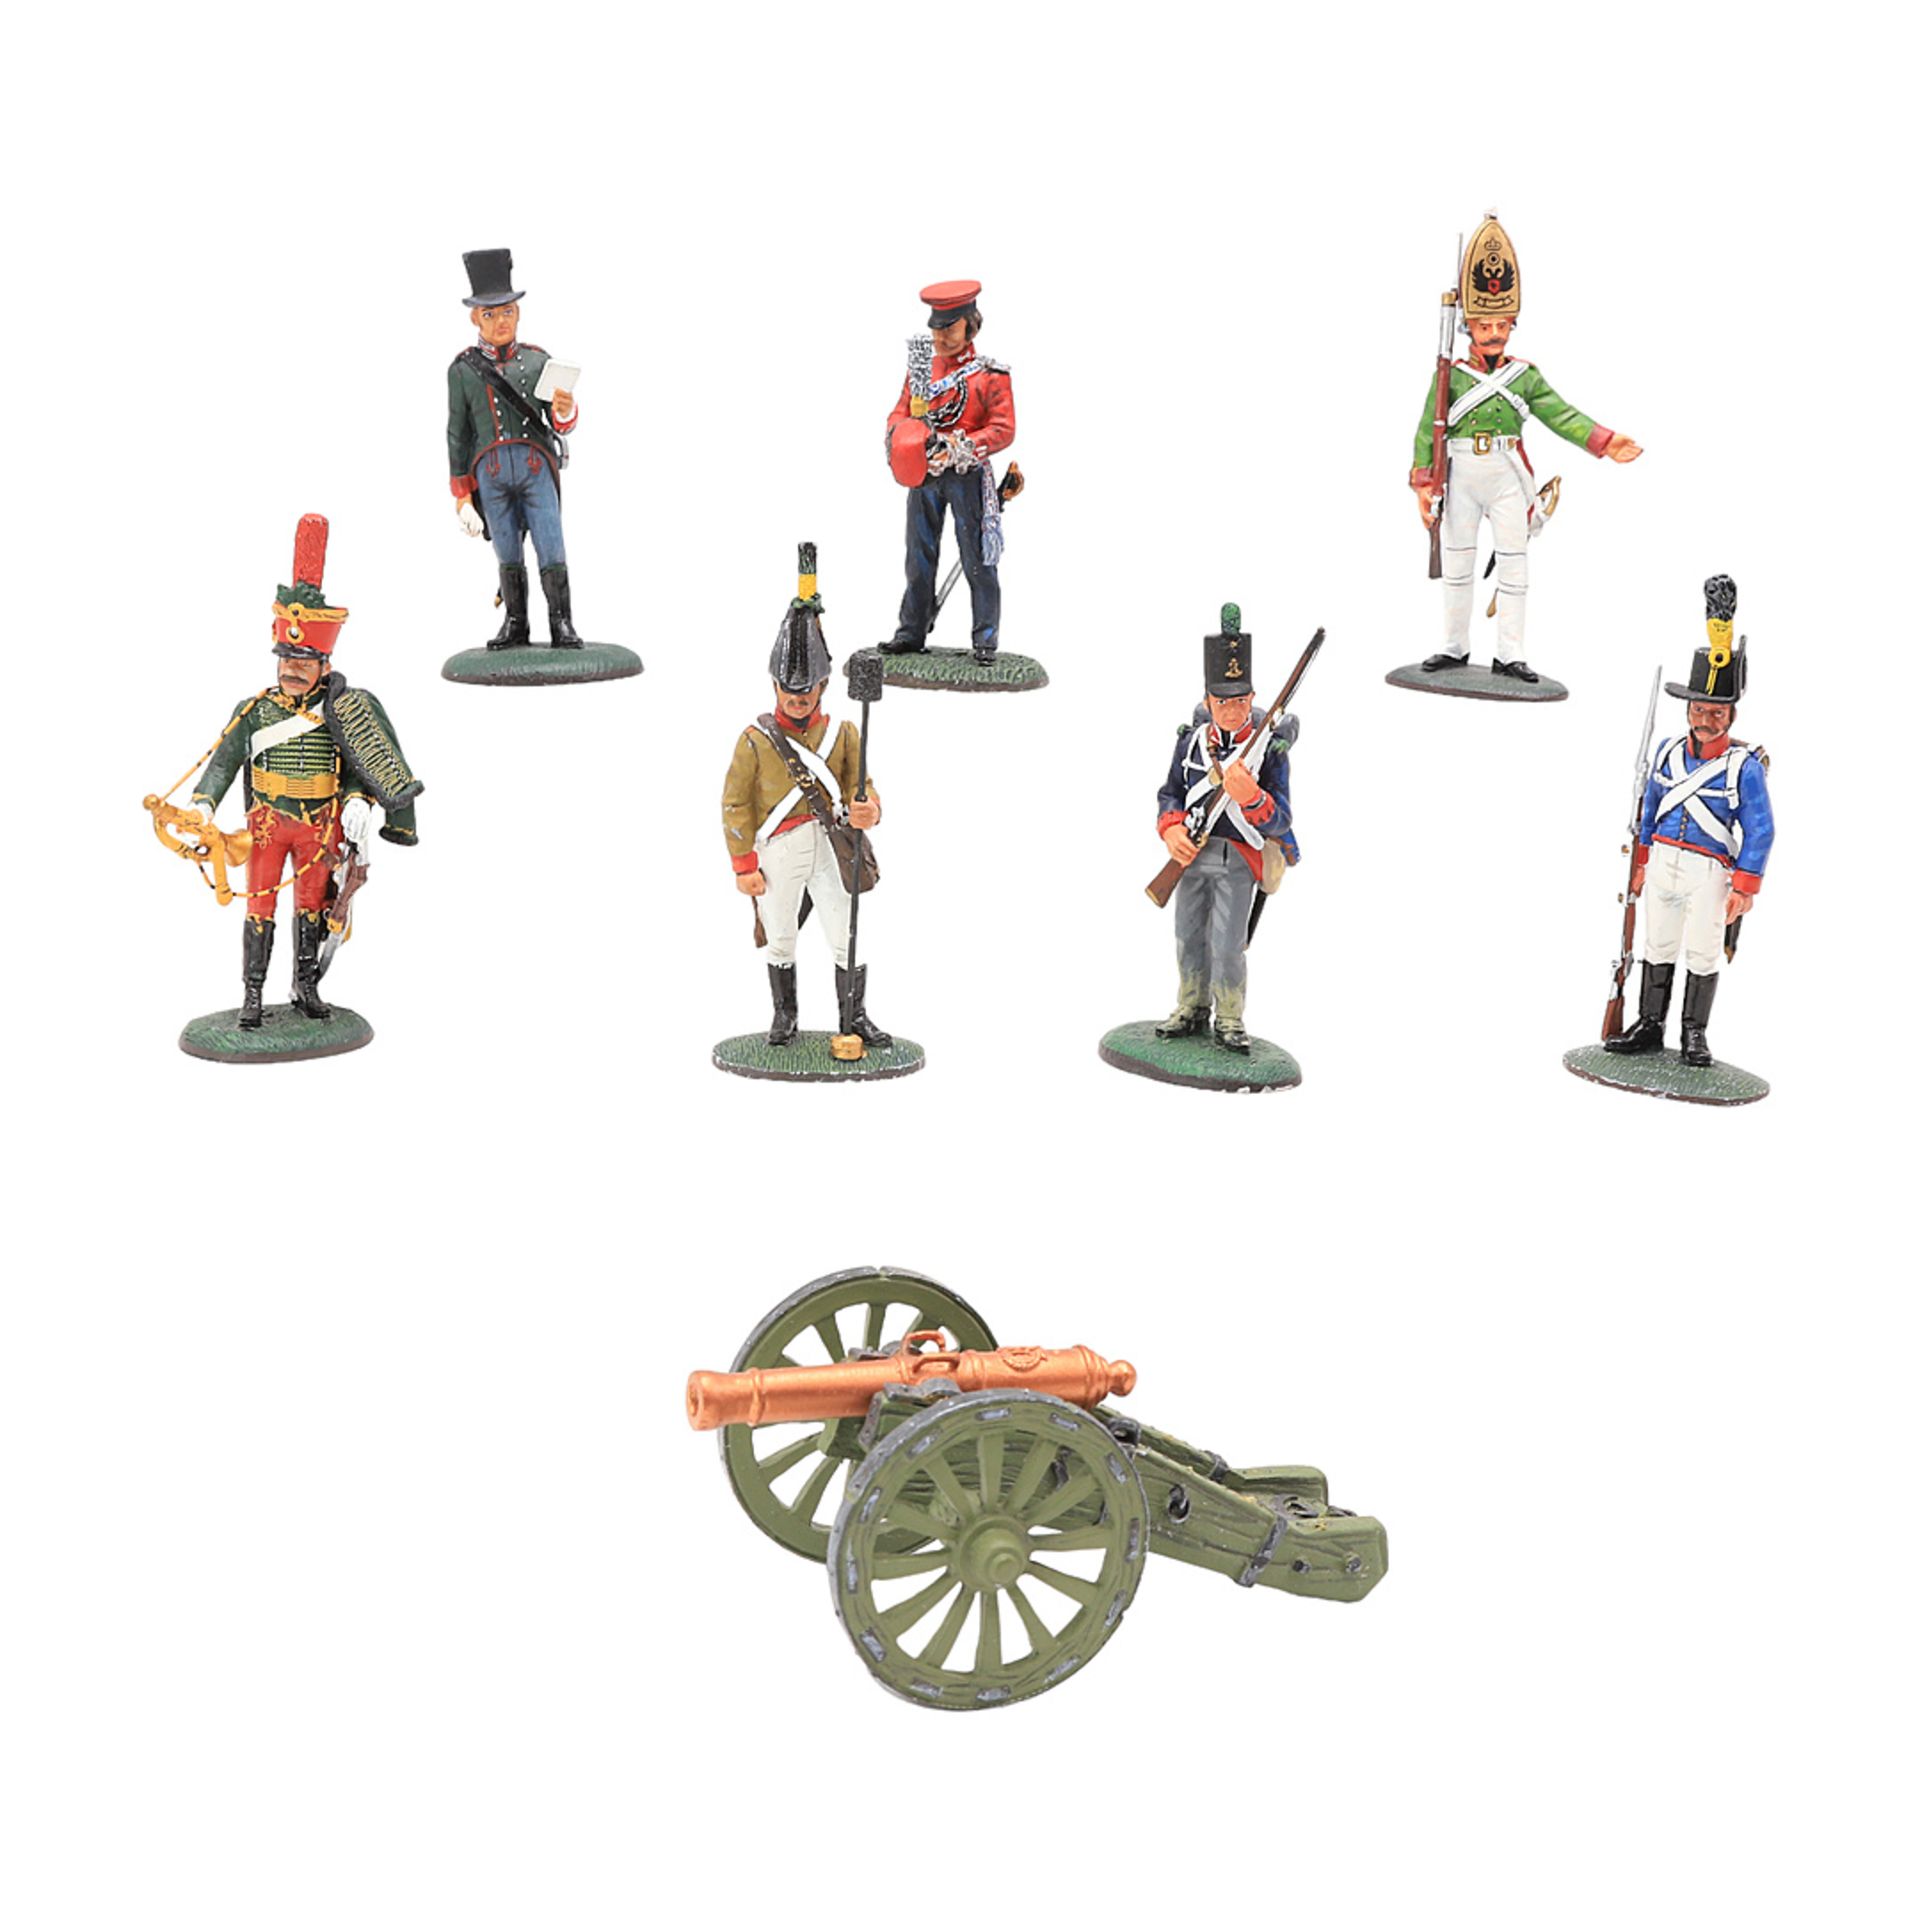 20 miniature figures of Allied soldiers and cannon, wars of liberation / battle of nations - Image 2 of 4